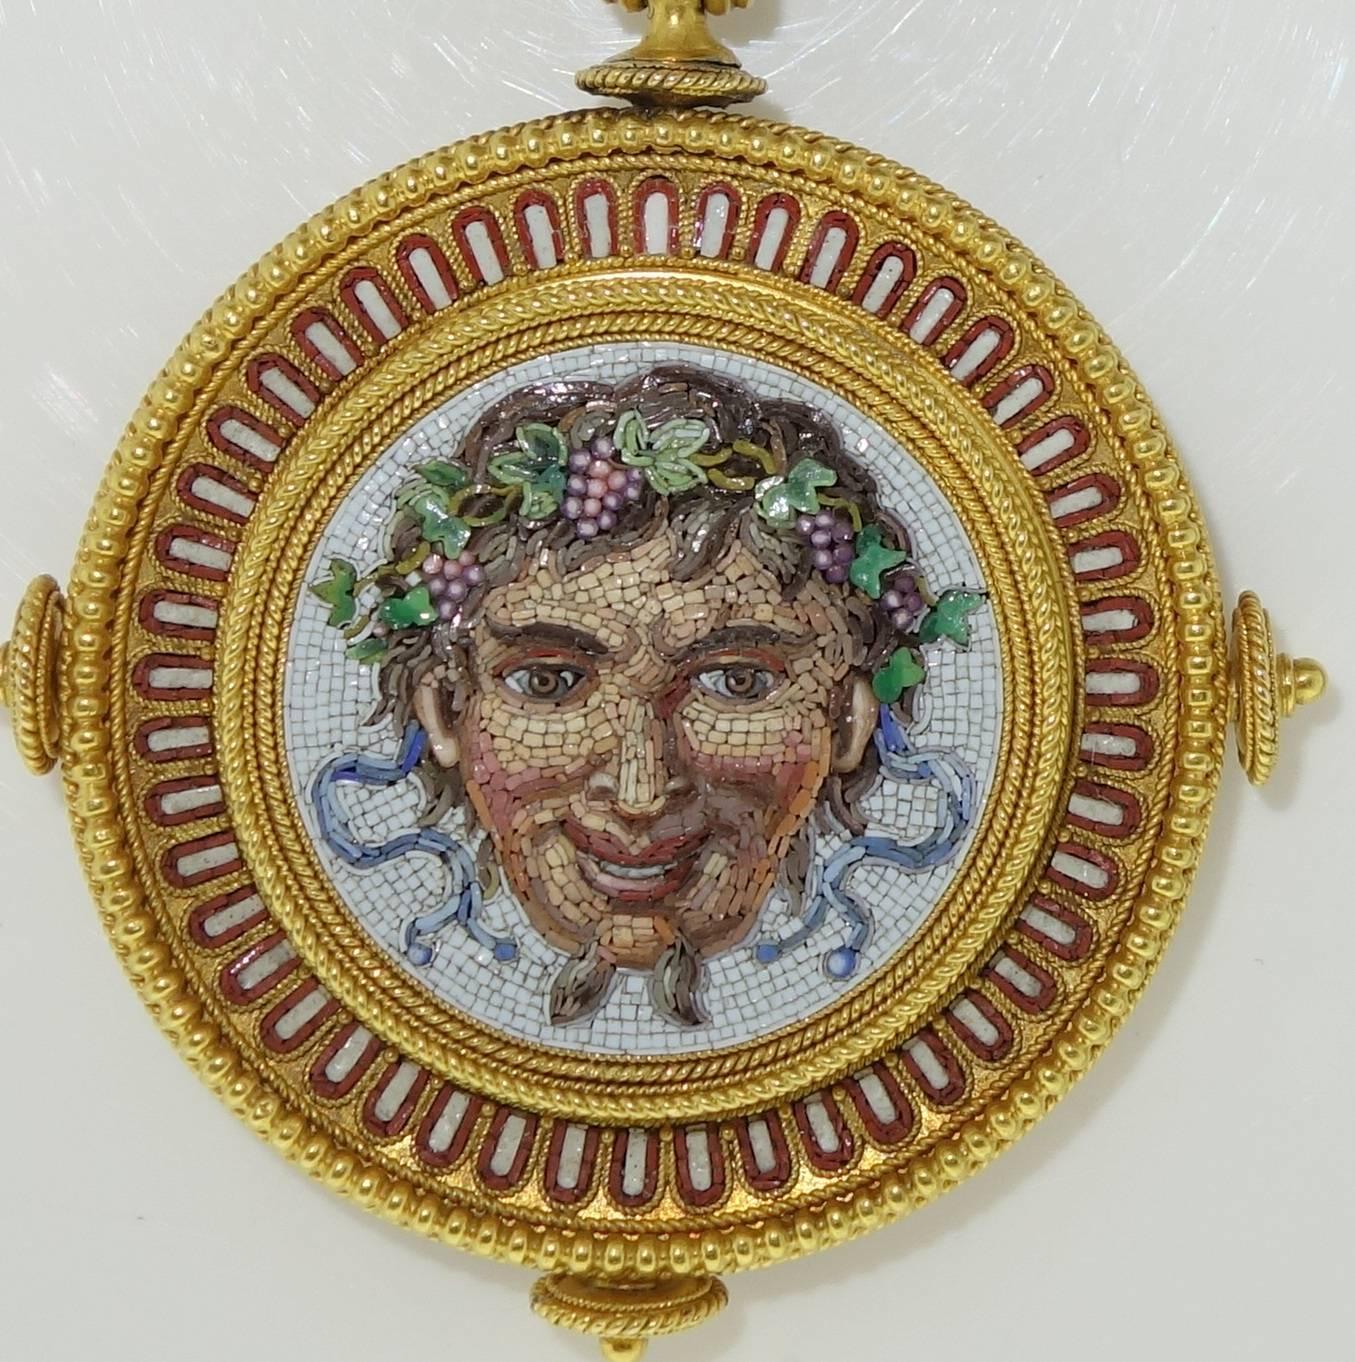 This necklace is a superb example of 19th century micro mosaic work.  18K, probably European, the Etruscan gold work is also quite fine.  The matching 18K chain is 17 inches long.  The pendant portion is 2.5 inches long.  The verso has a locket